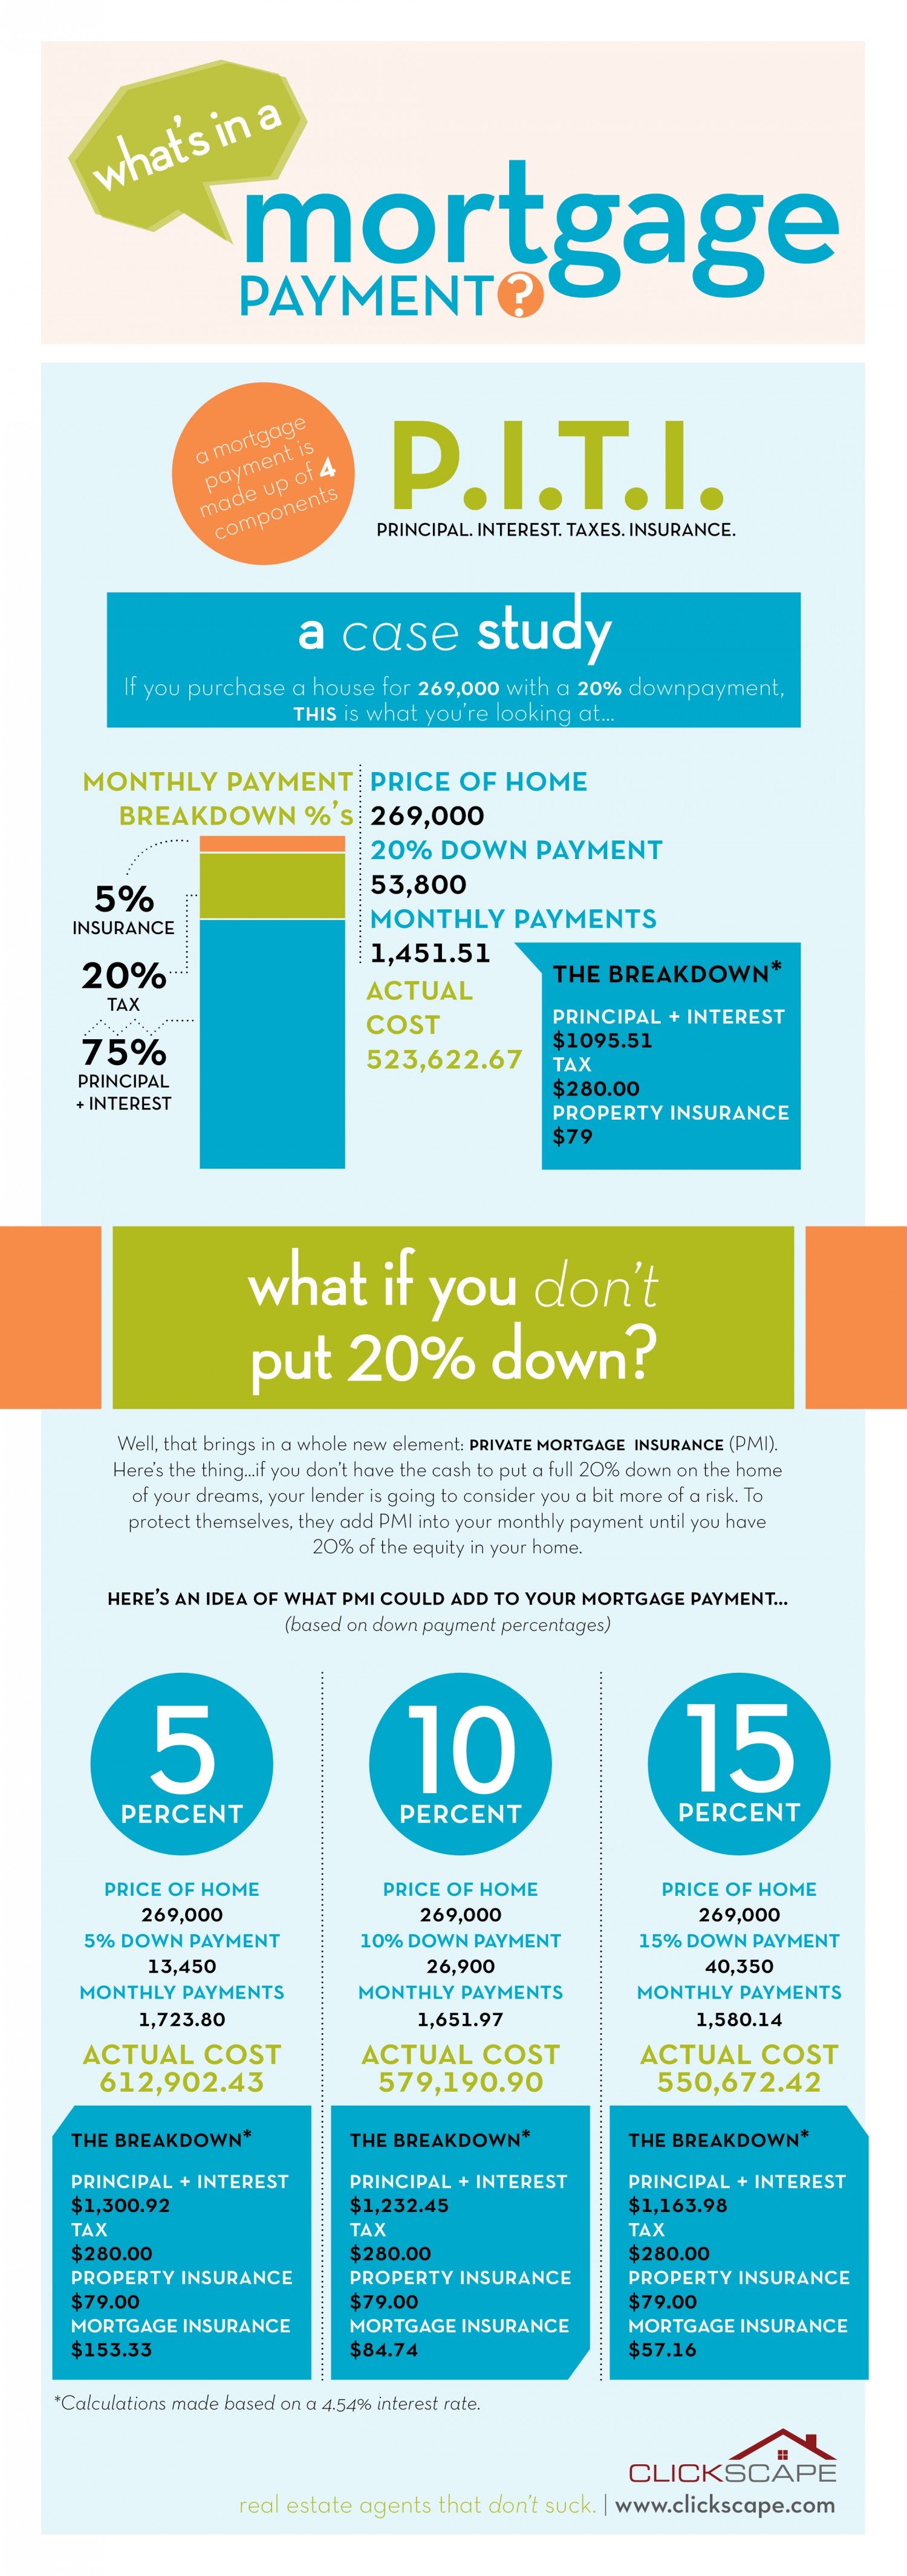 whats-in-a-mortgage-payment